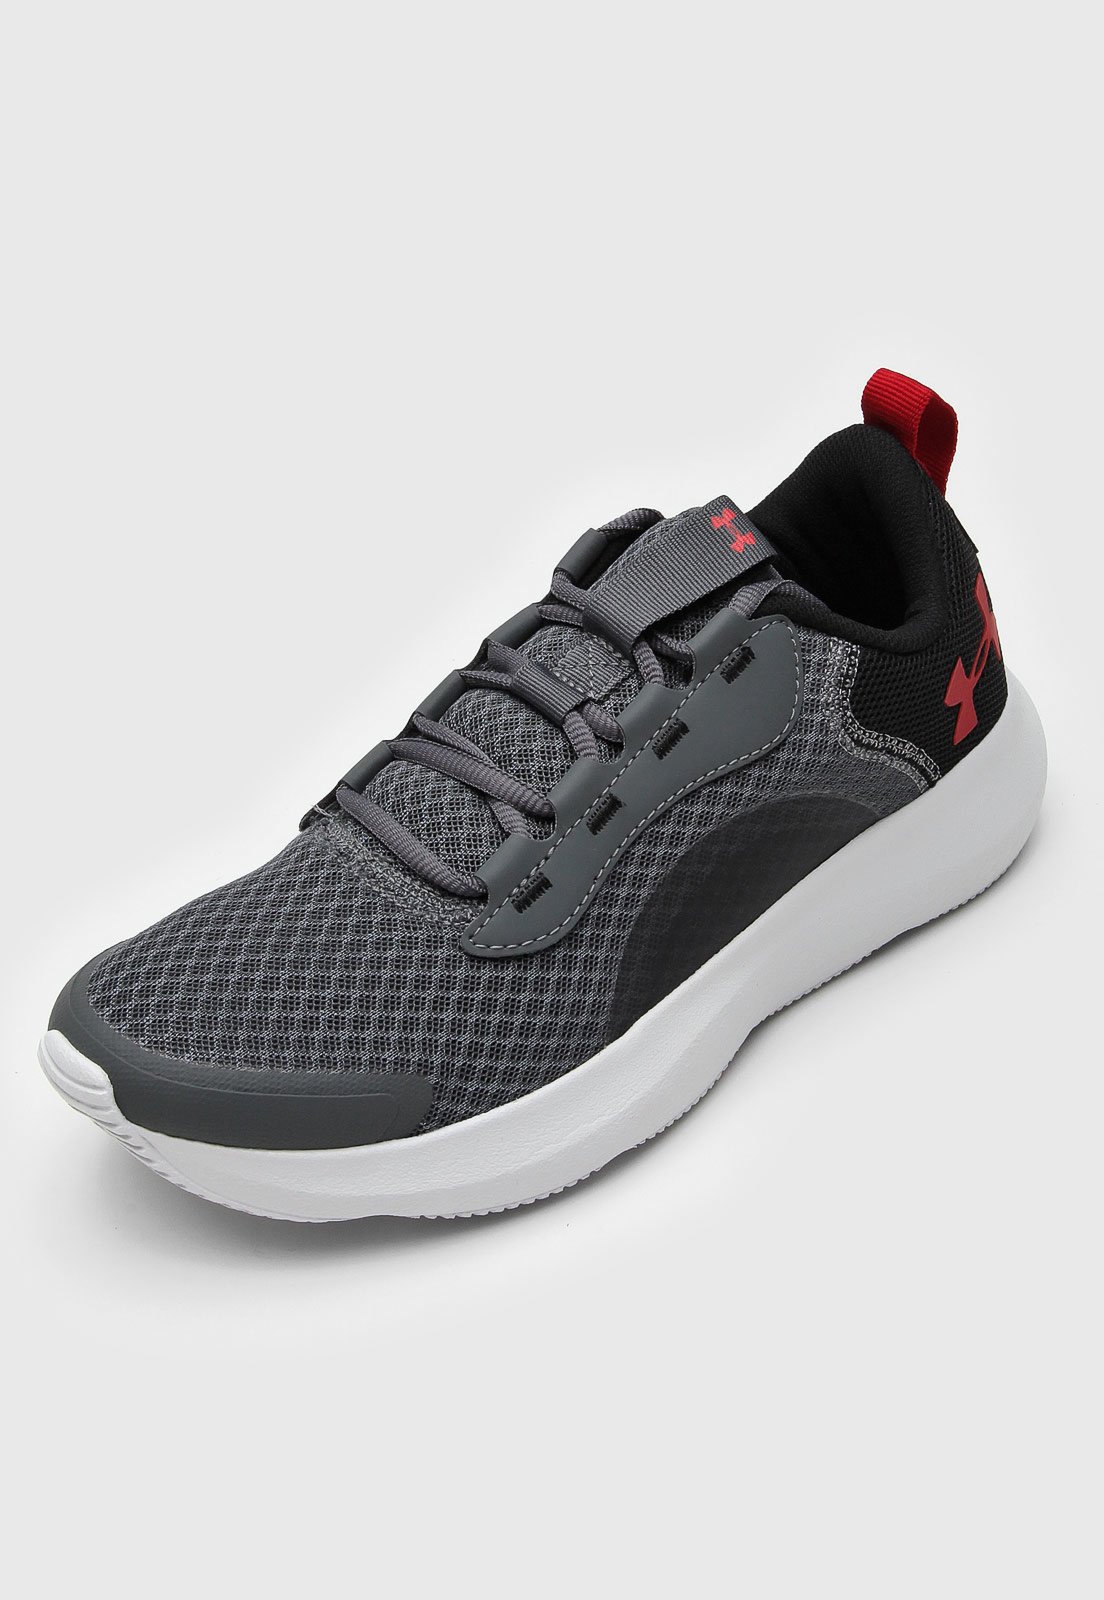 Tênis Under Armour Charged Victory Masculino